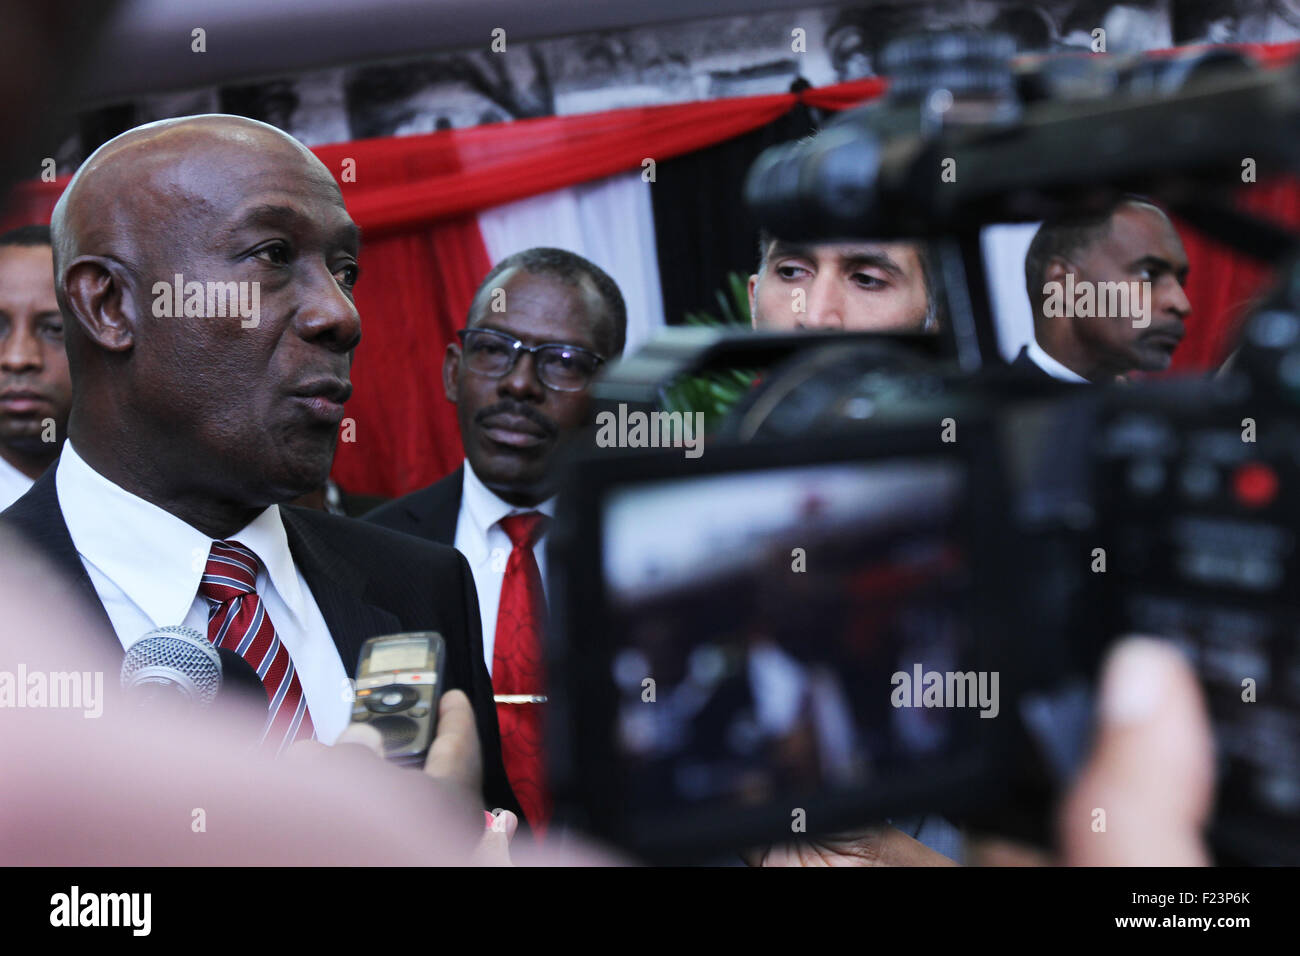 Port of Spain, Trinidad & Tobago. 9th September, 2015. Keith Christopher Rowley (L), Prime Minister of Trinidad & Tobago, speaks to journalists at his swearing-in ceremony at Queen's Hall in Port of Spain, Trinidad on September 9, 2015.  (Photo by Sean Drakes/LatinContent/Getty Images) Credit:  SEAN DRAKES/Alamy Live News Stock Photo